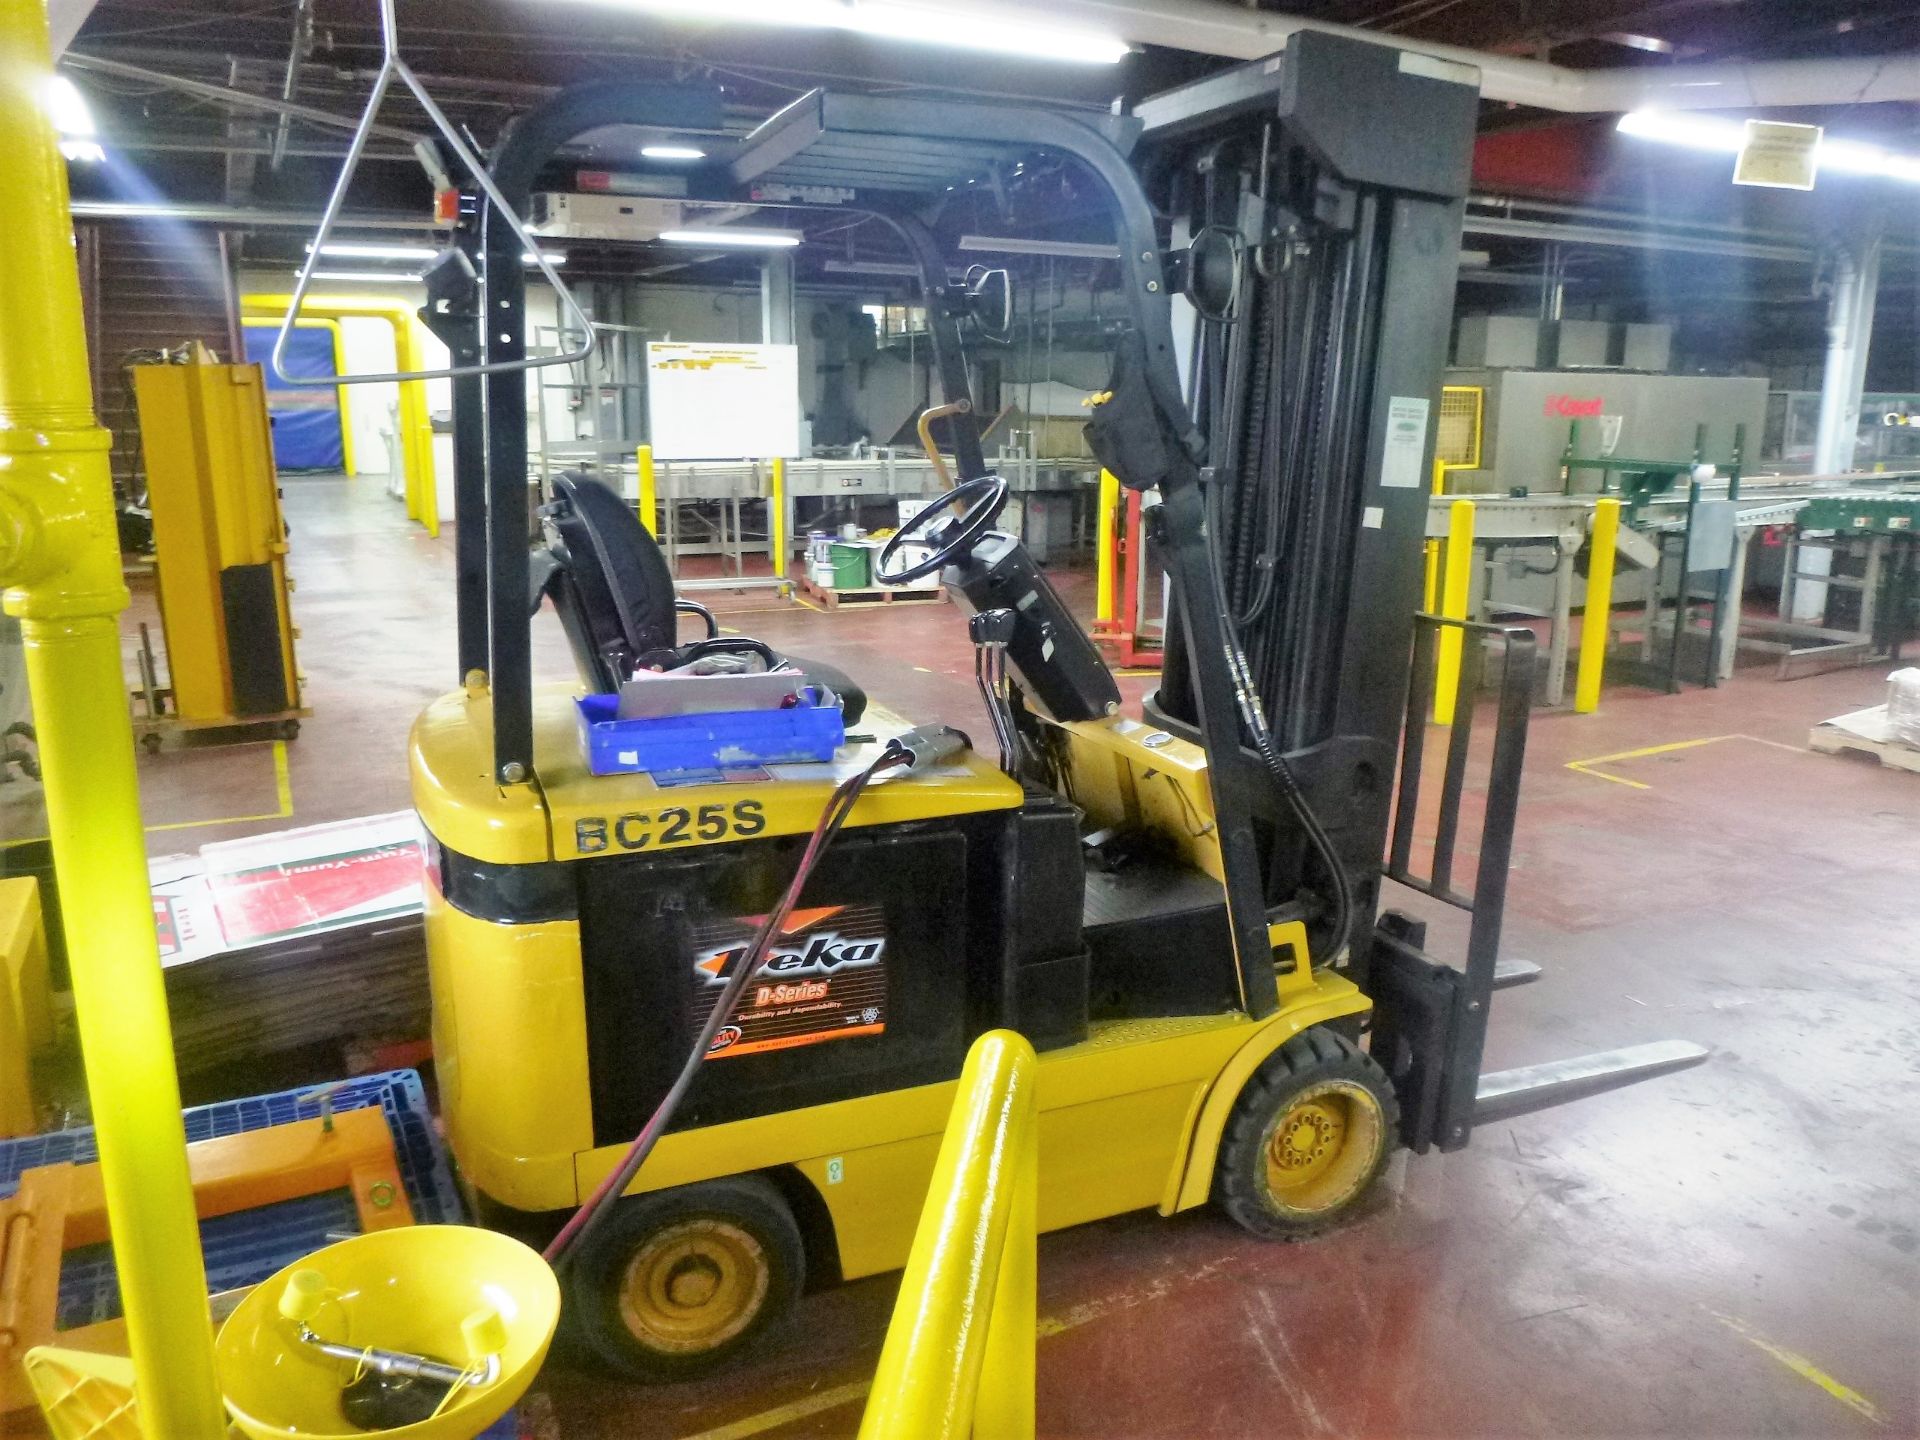 Daewoo Electric Forklift (Restricted Removal: Not available for removal until after May 1st.) - Image 2 of 5